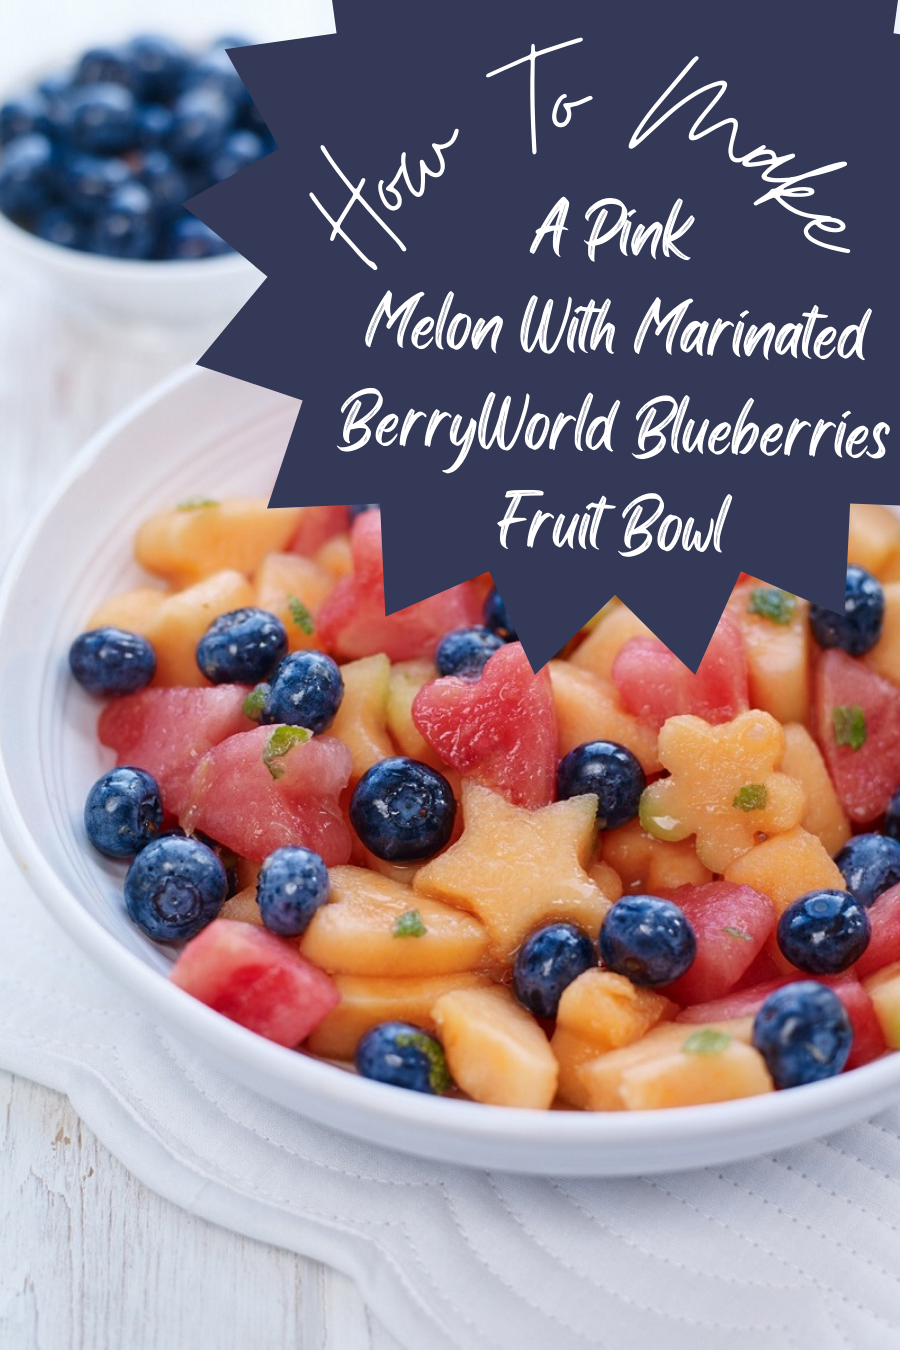 How To Make A Pink Melon With Marinated BerryWorld Blueberries Fruit Bowl